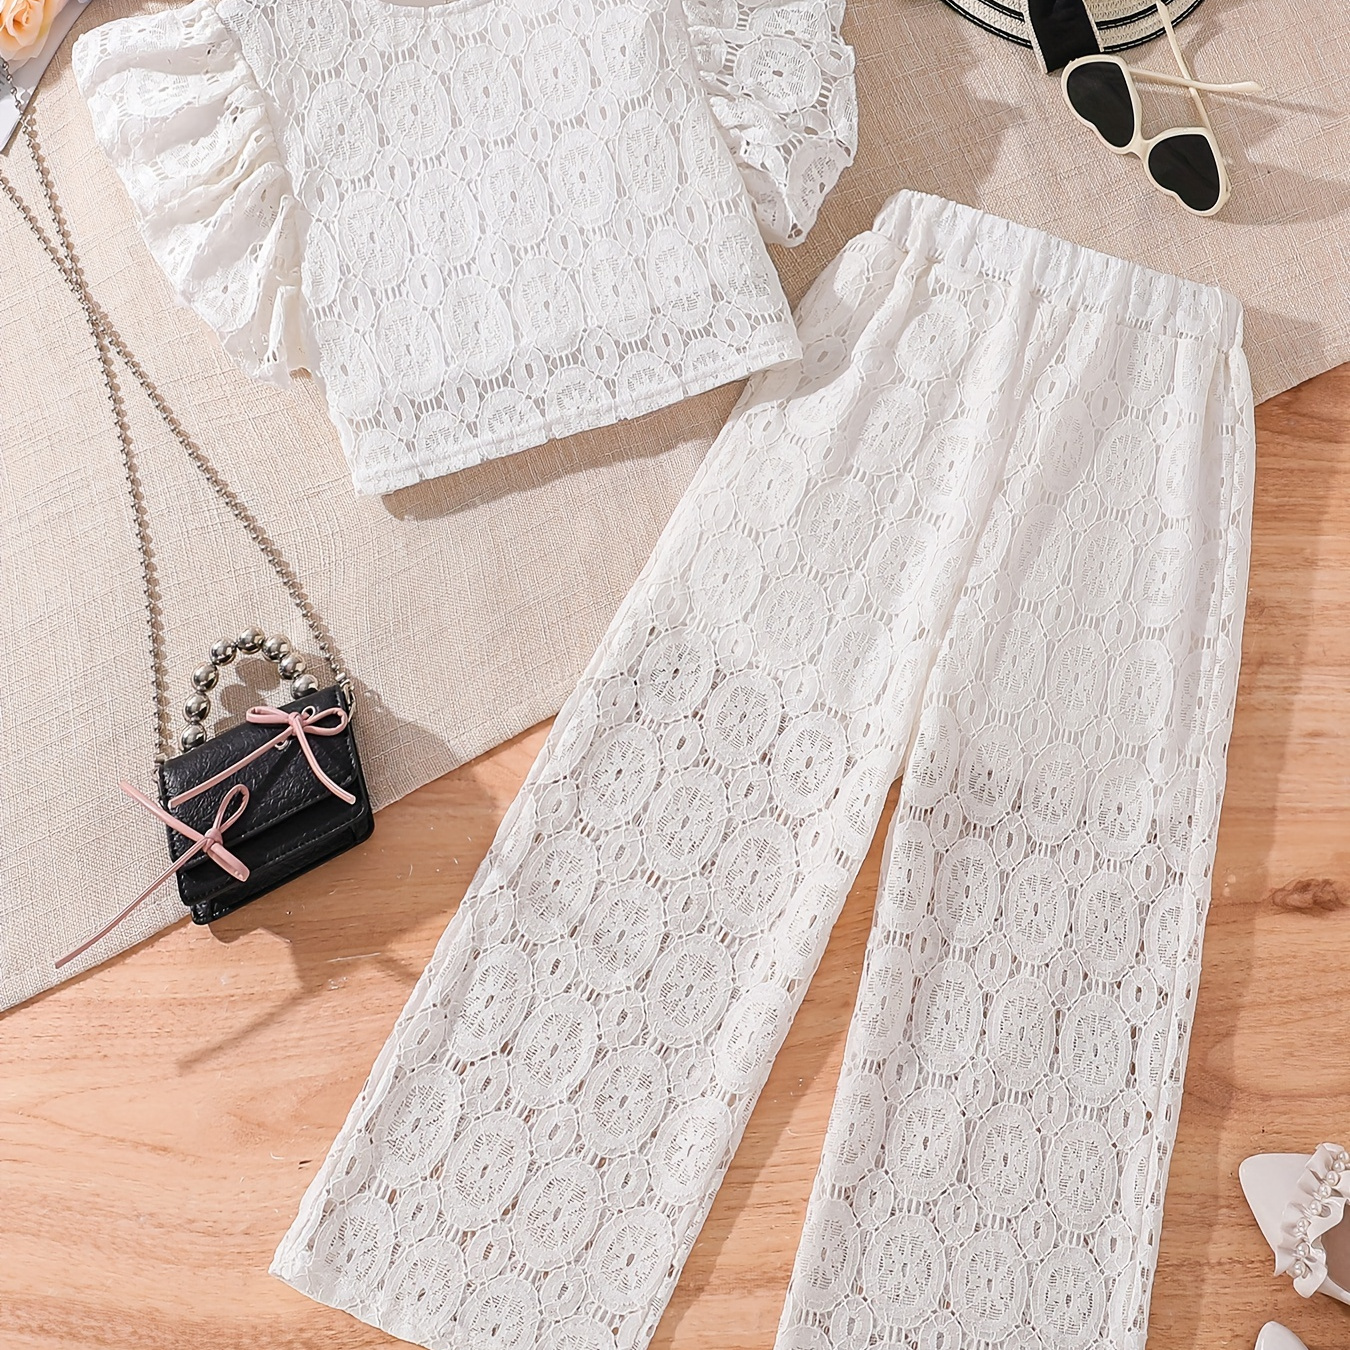 

Elegant Lace Set 2pcs, Flounce-sleeve Top + -out Pants Girl's Summer Clothes - Perfect For Casual Outings, Gift Idea